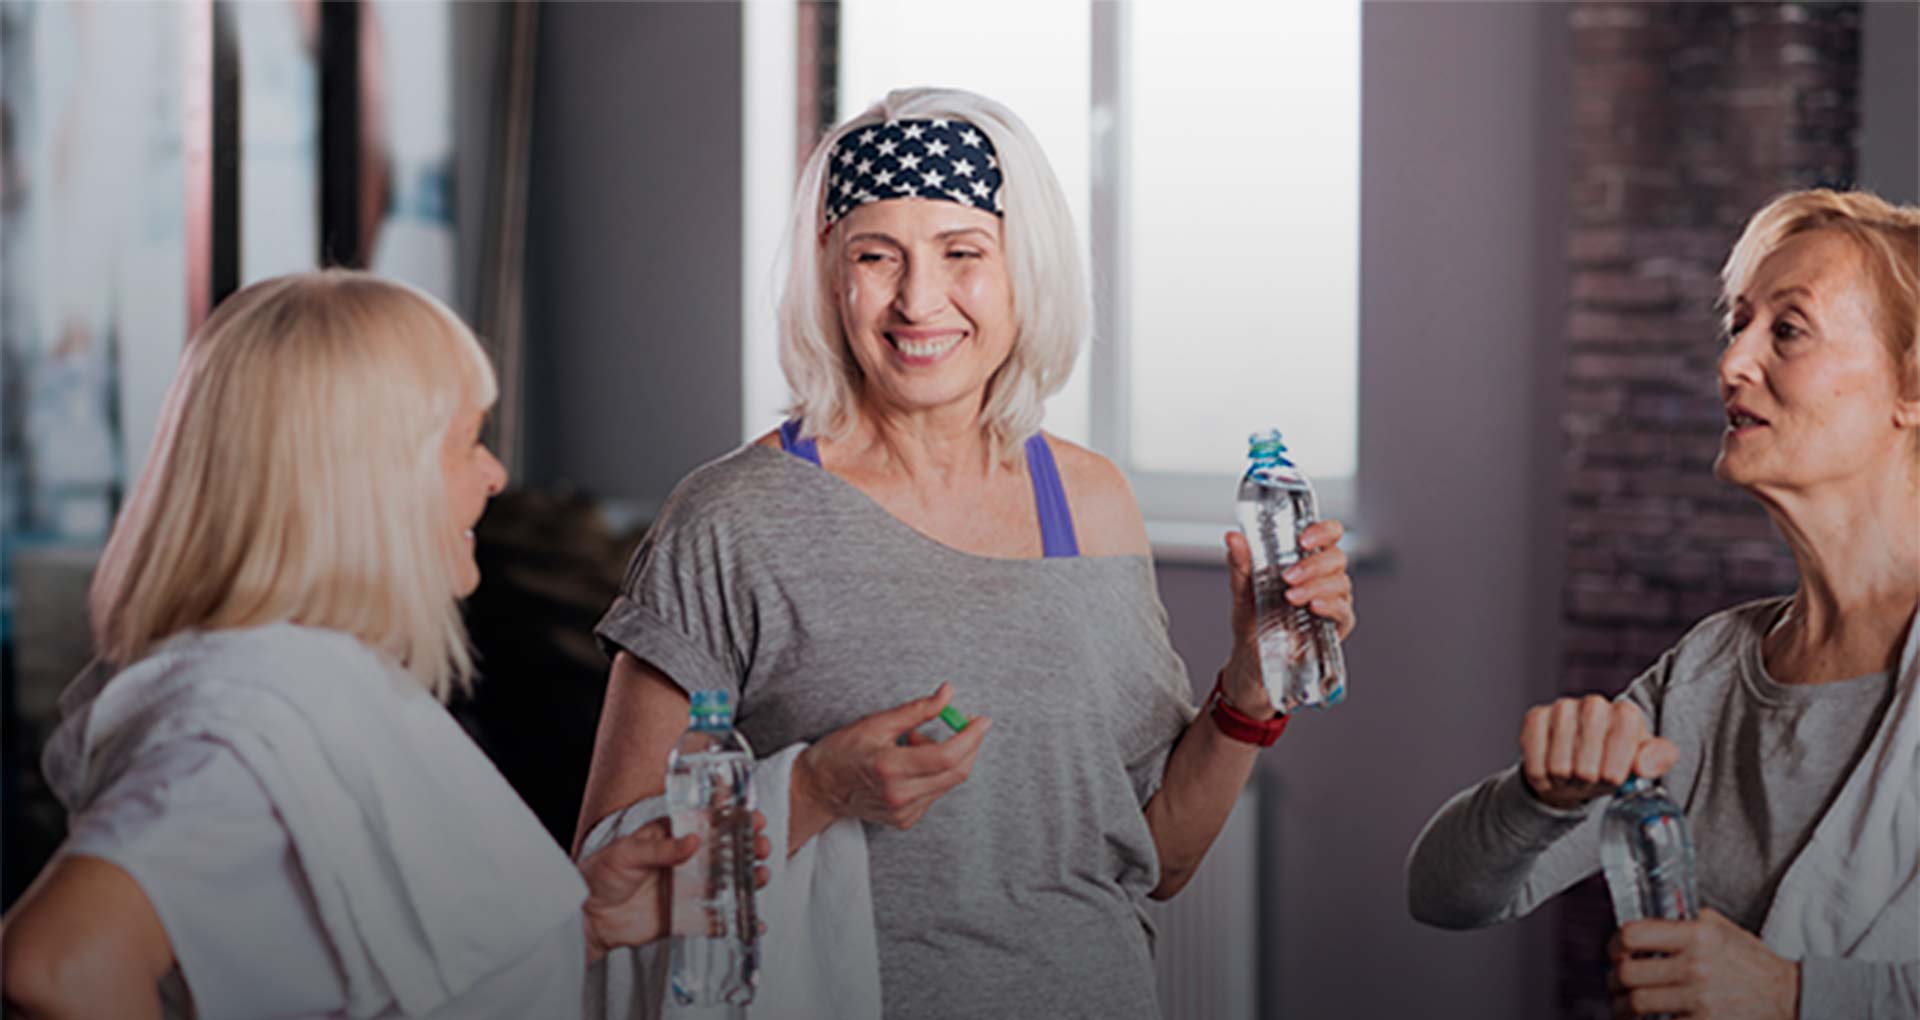 Women drinking water for hydration after exercise